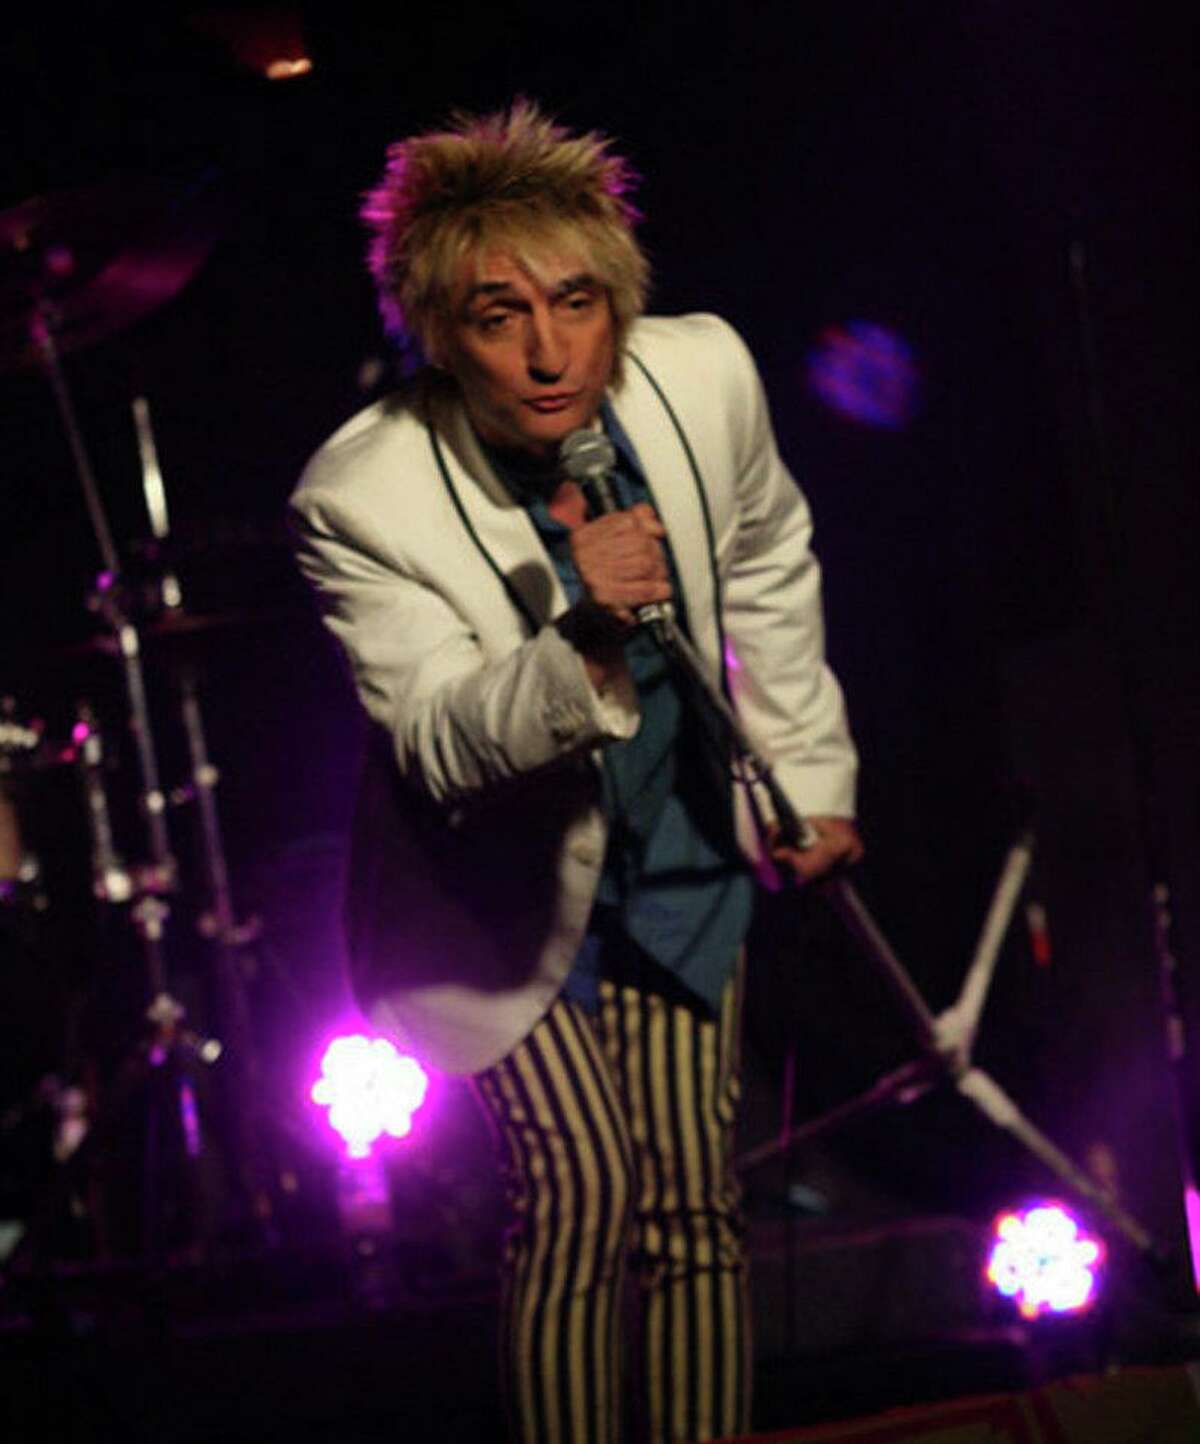 Rod Stewart tribute artist Vic Vaga performs at Tomball's Main Street Crossing on July 21.